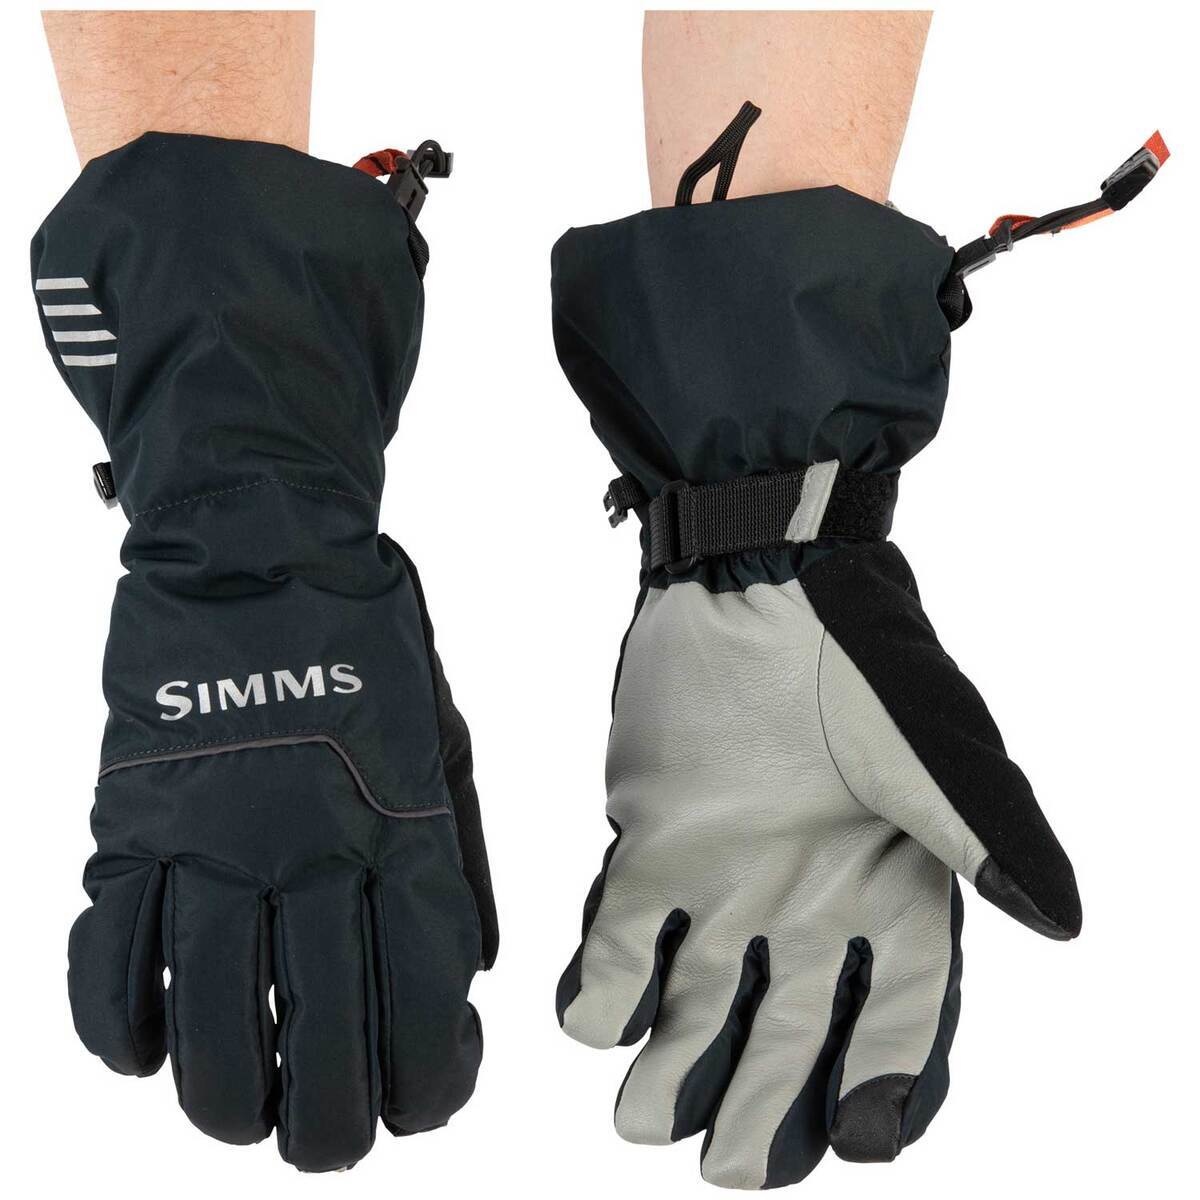 SIMMS CHALLENGER INSULATED GLOVE